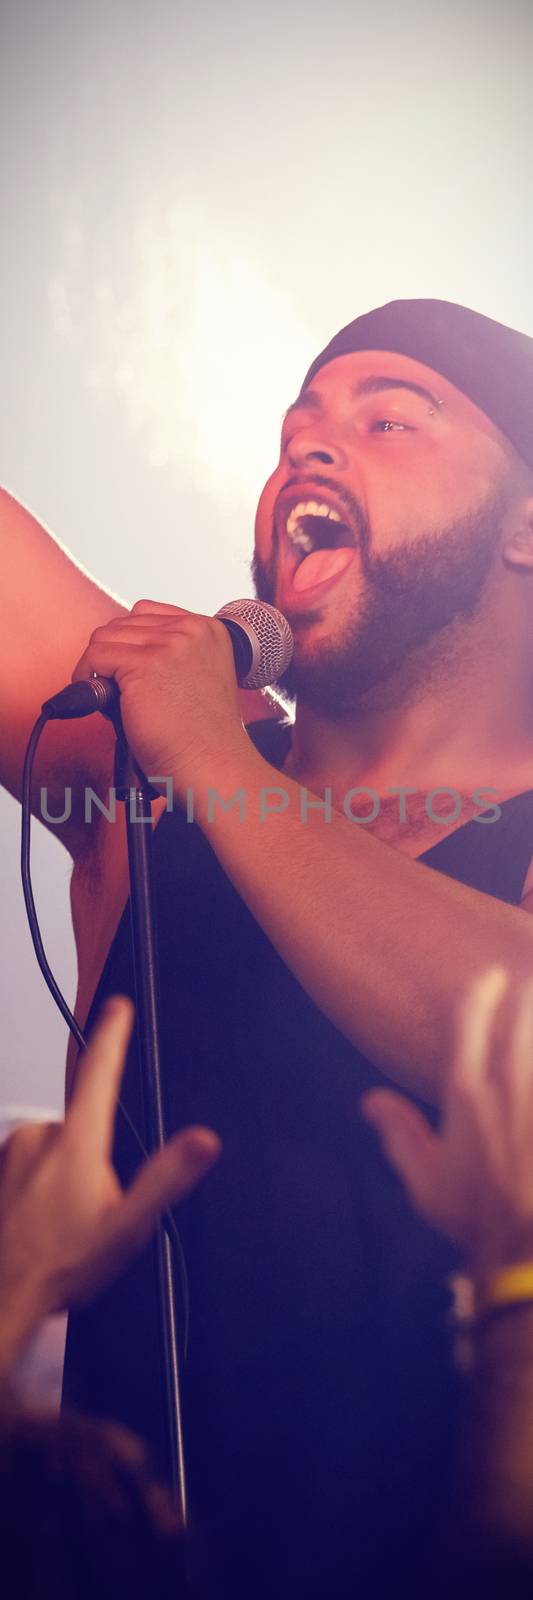 Enthusiastic male singer performing at nightclub during concert